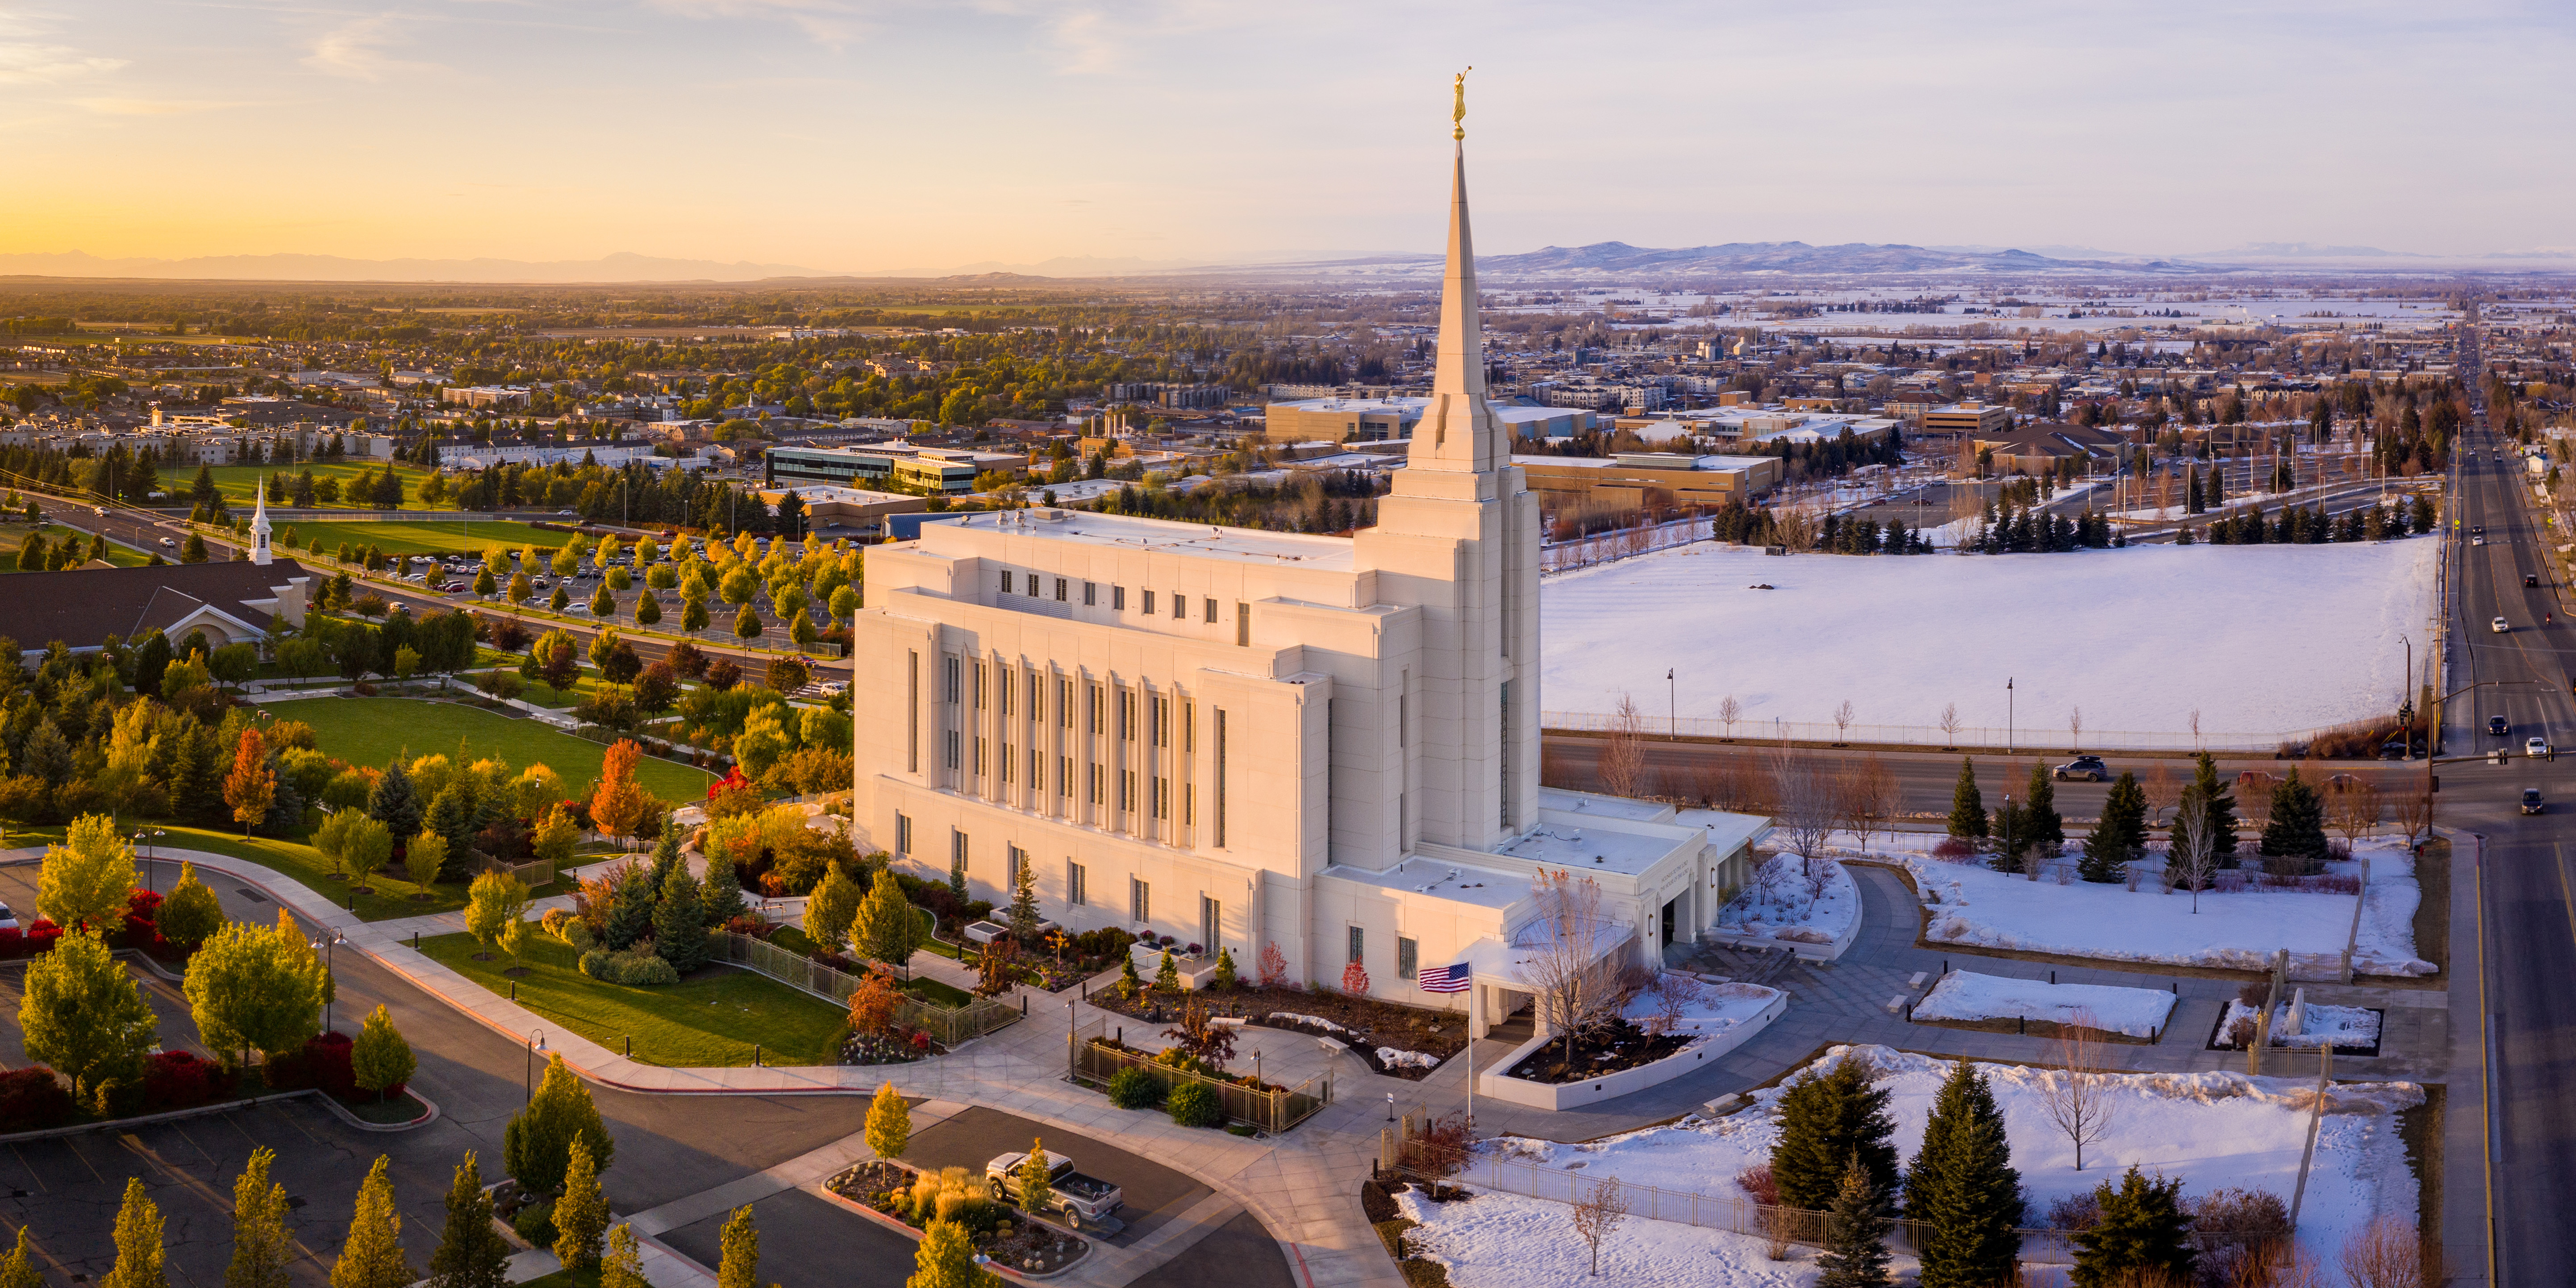 Rexburg LDS Temple is the center of the image with a snow-covered winter scene on the right and green blooming summer on the left